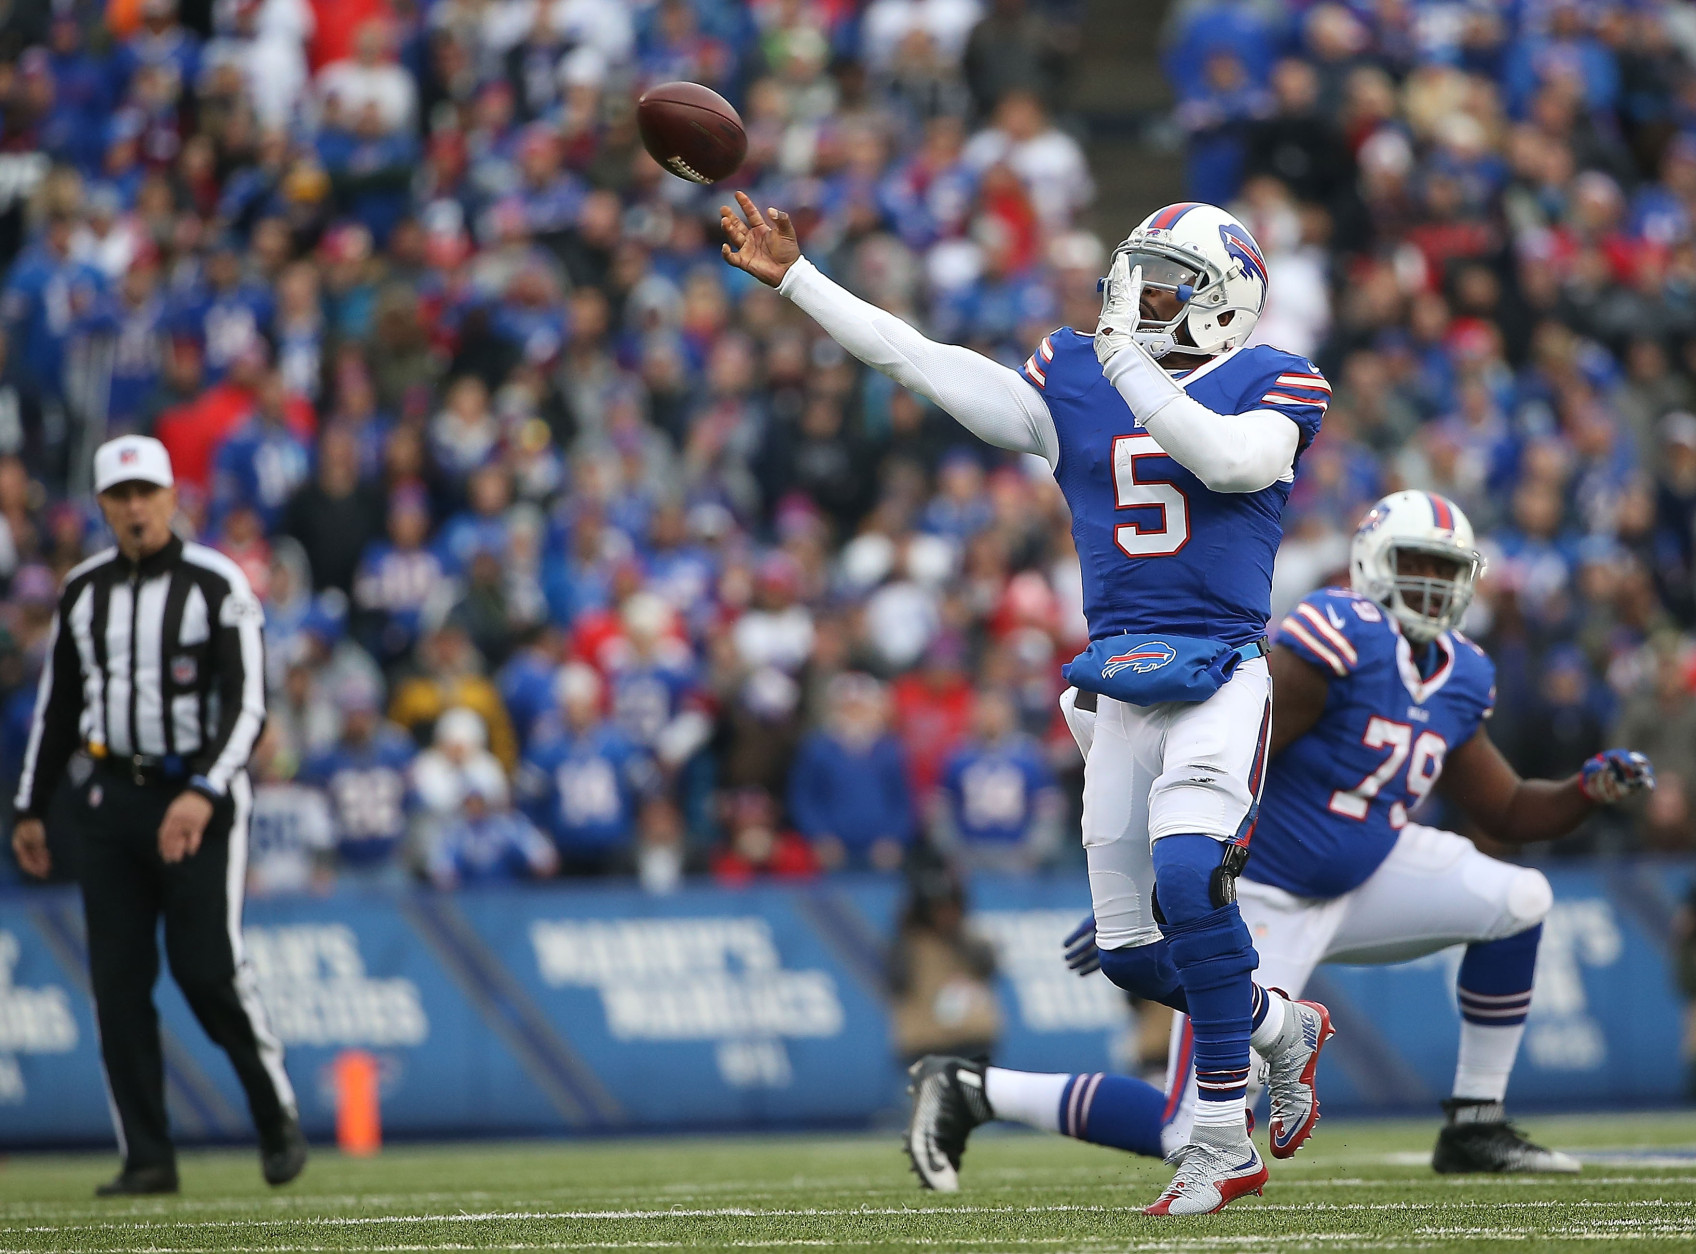 ORCHARD PARK, NY - DECEMBER 06:   Tyrod Taylor #5 of the Buffalo Bills throws the ball against the Houston Texans during the second half at Ralph Wilson Stadium on December 6, 2015 in Orchard Park, New York.  (Photo by Tom Szczerbowski/Getty Images)